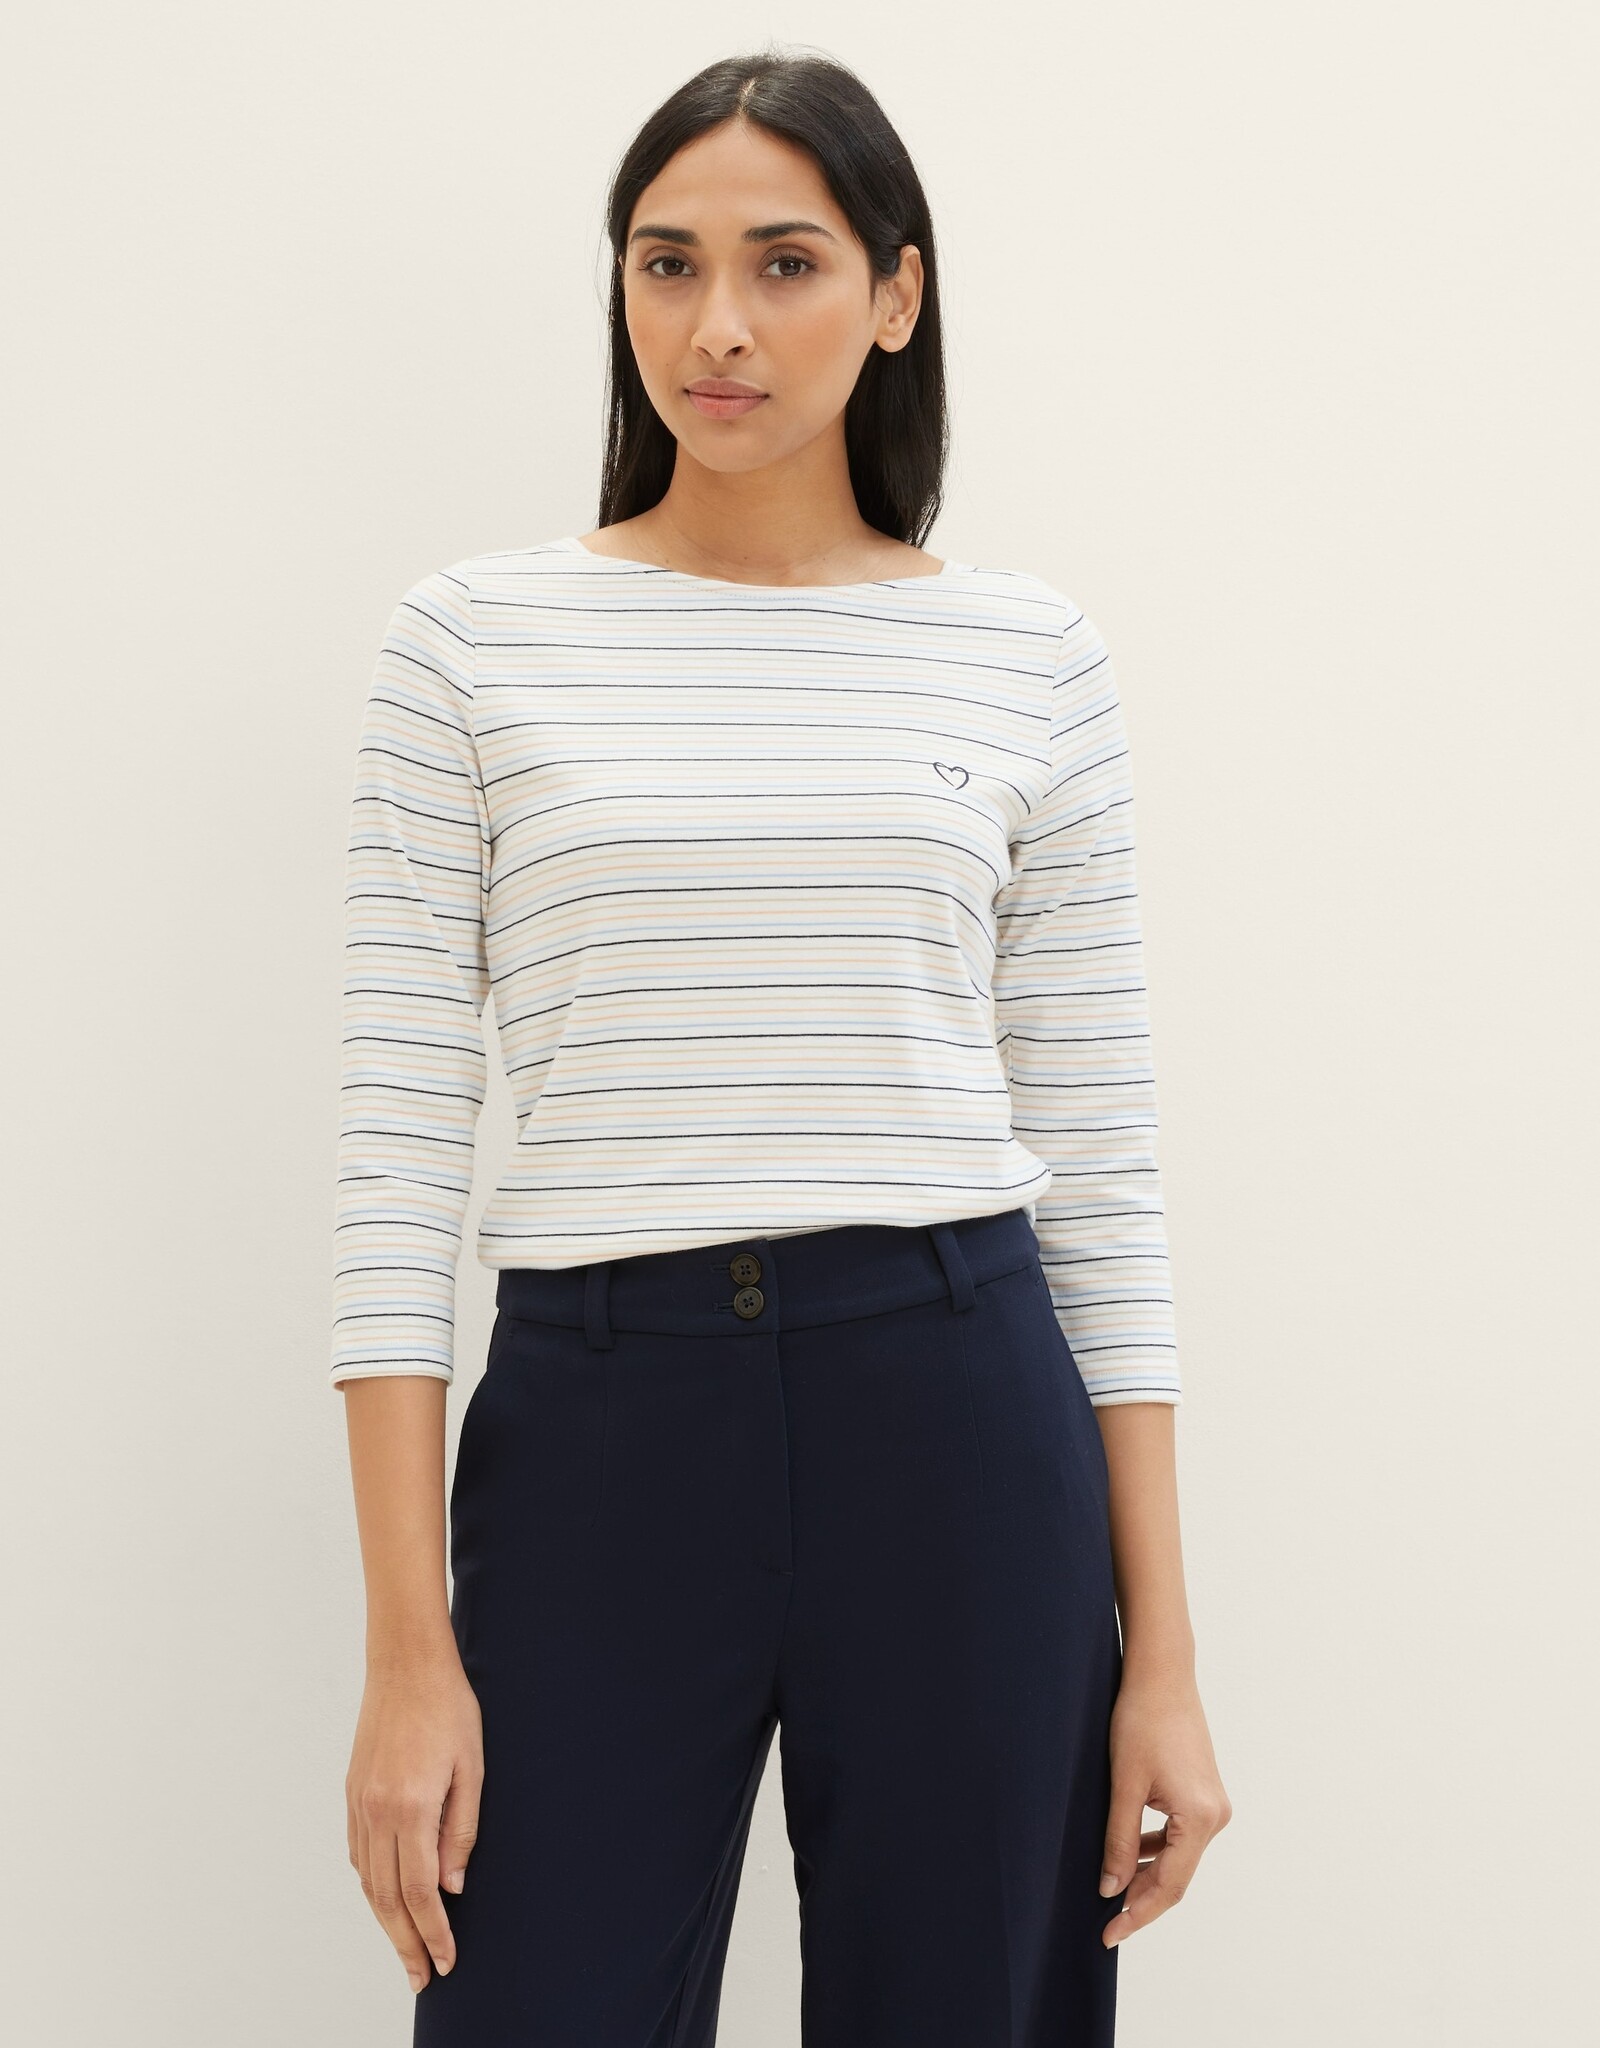 Tom Tailor Striped Boat Nk T-Shirt